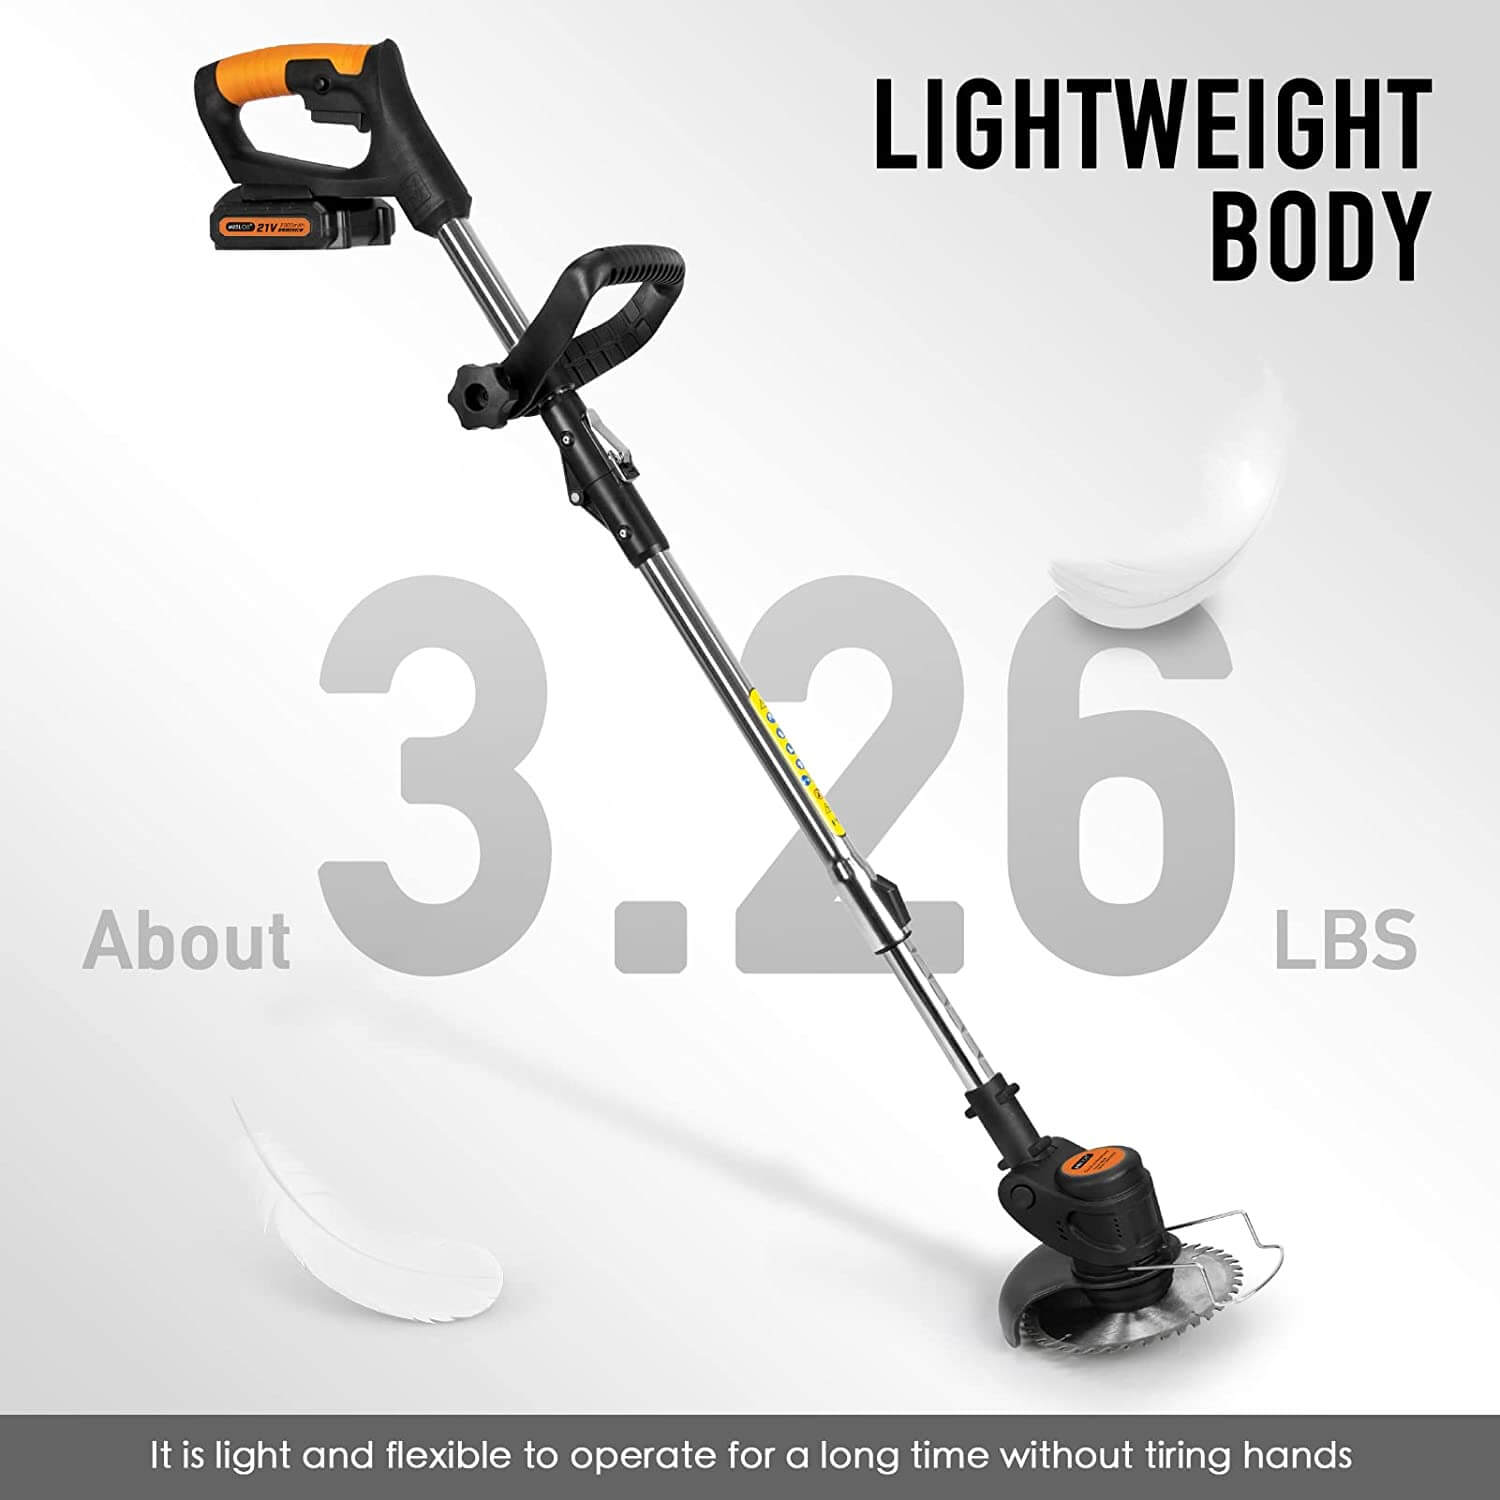 The weight of the entire package is 6.6lbs (3.6kg), and the weight of the grass trimmer is 3.26lbs (1.48kg), which is very suitable for gardeners with hand pain, waist pain, and pursuit of light portability